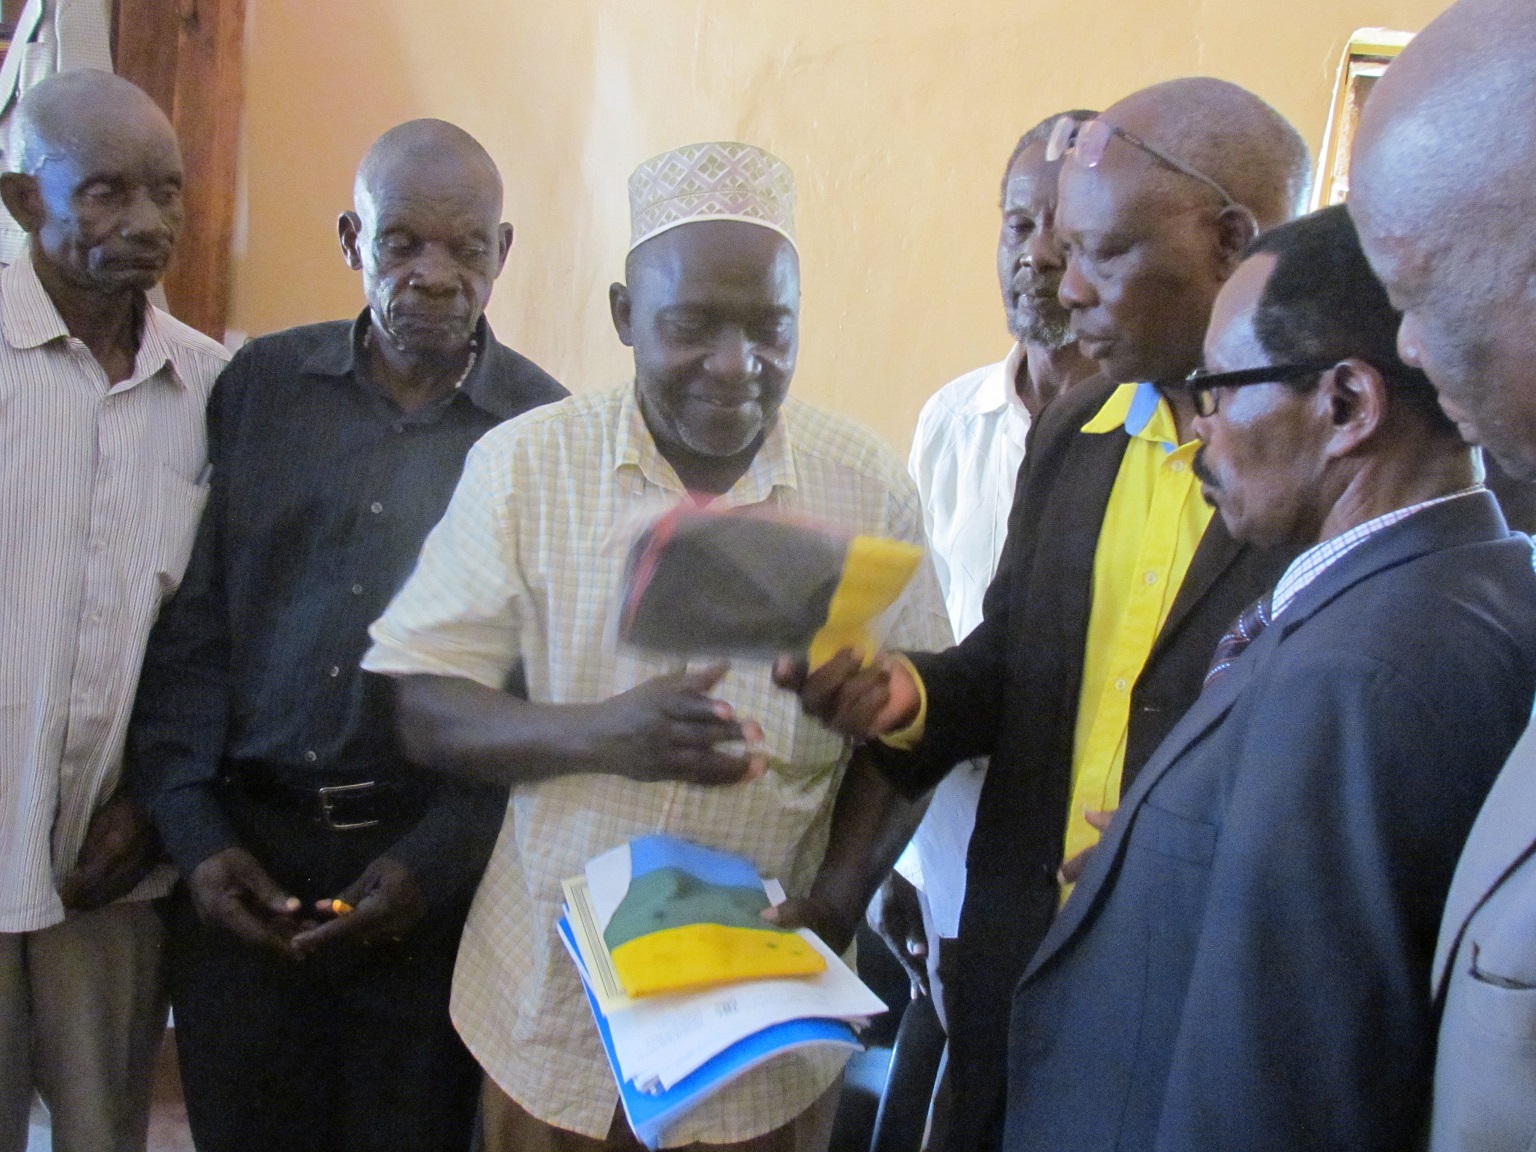 Members of the elders Sacco admiring their certificate which was recently given to them.